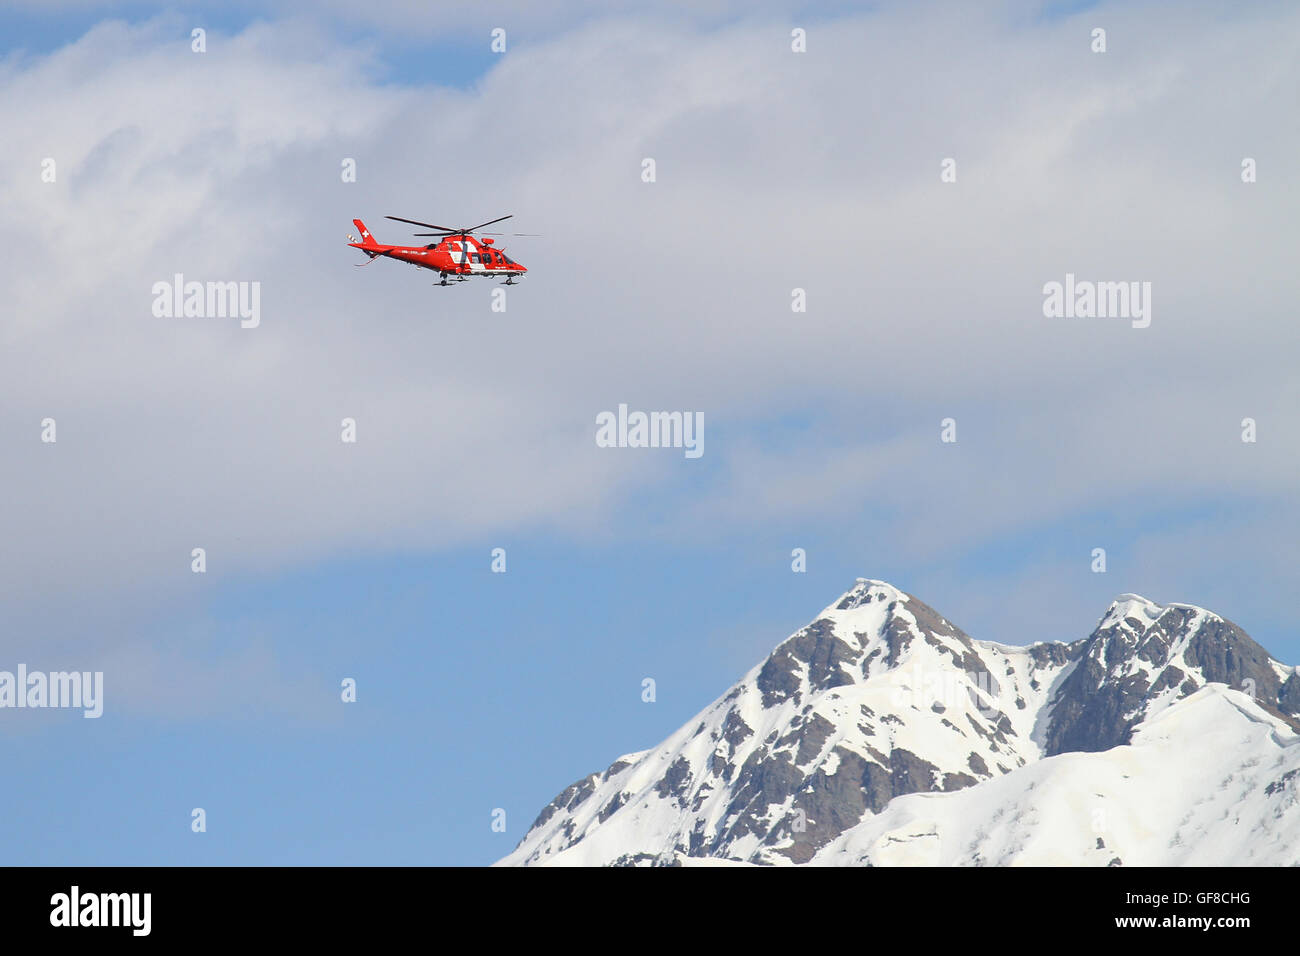 Rega Agusta 109  helicopter during a high altitude mountain rescue operation in the Alps in May 2016 Stock Photo